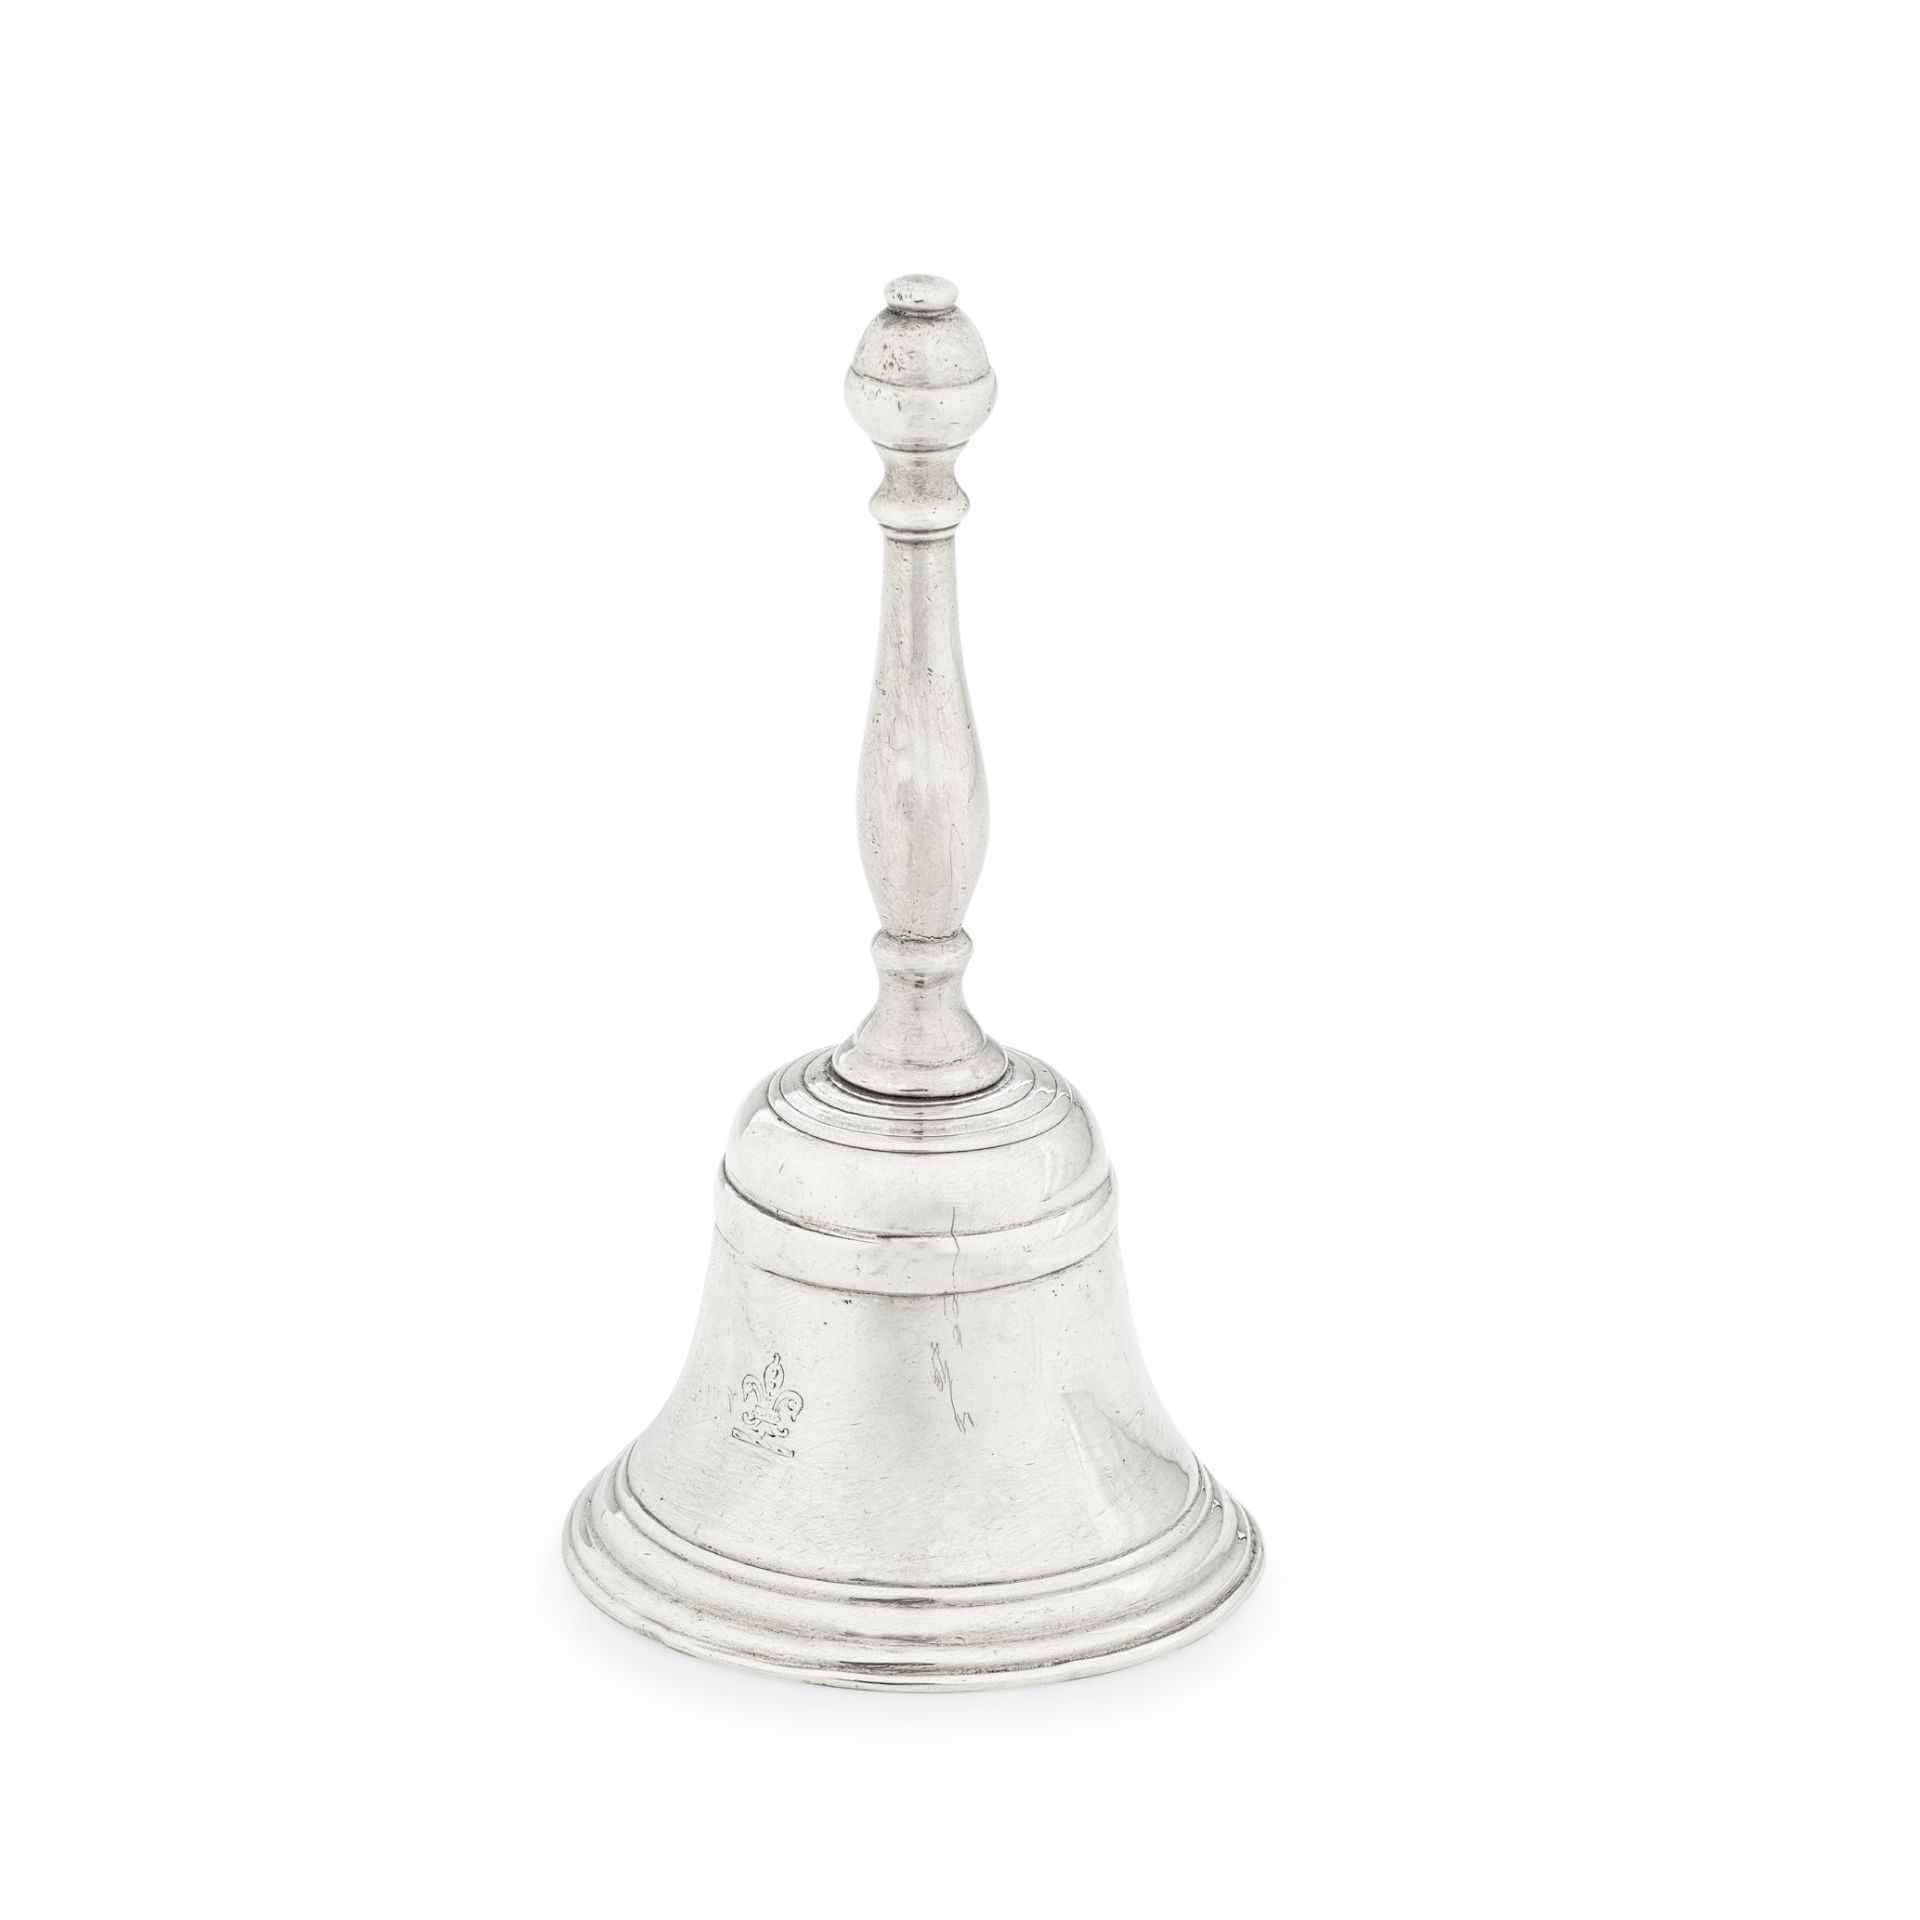 A George III silver bell maker's mark NG, London 1777 or 1783